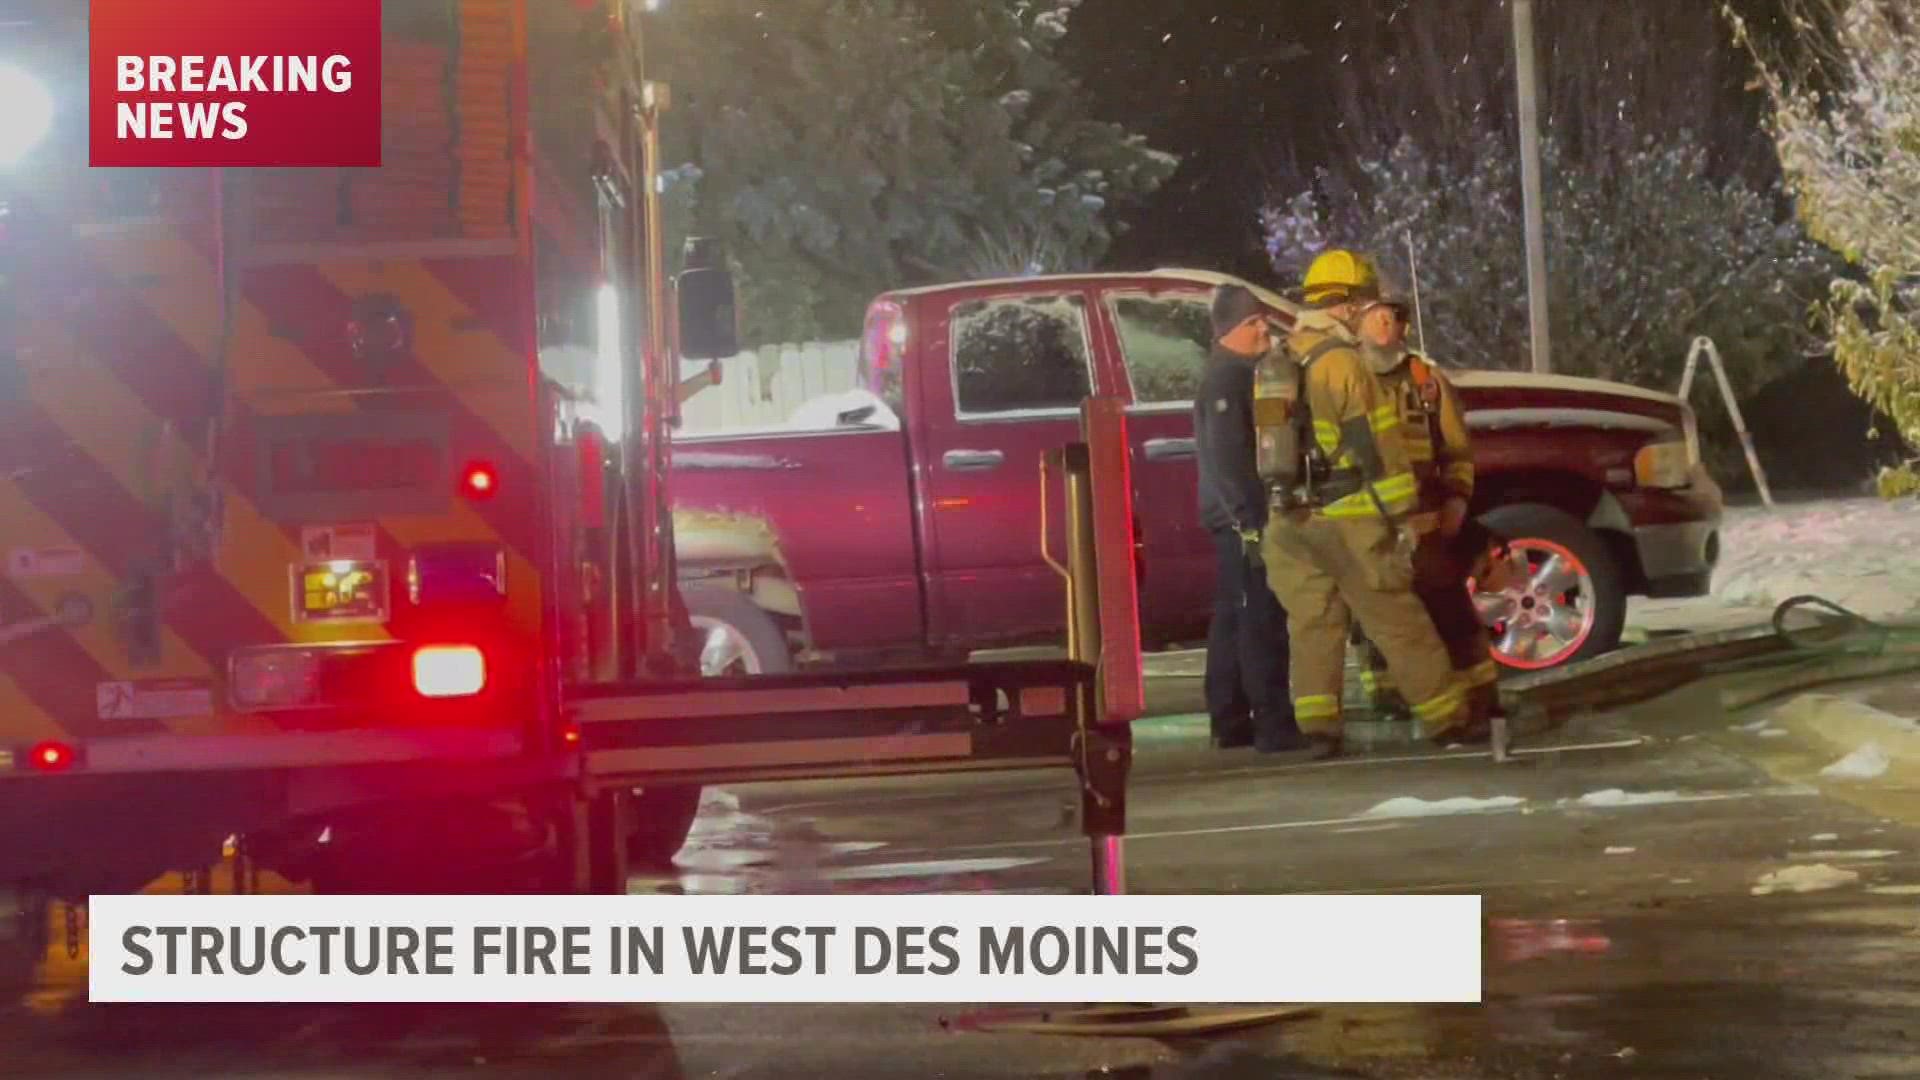 West Des Moines and Clive fire departments responded to a structure fire at  slightly before 8 p.m. Tuesday.